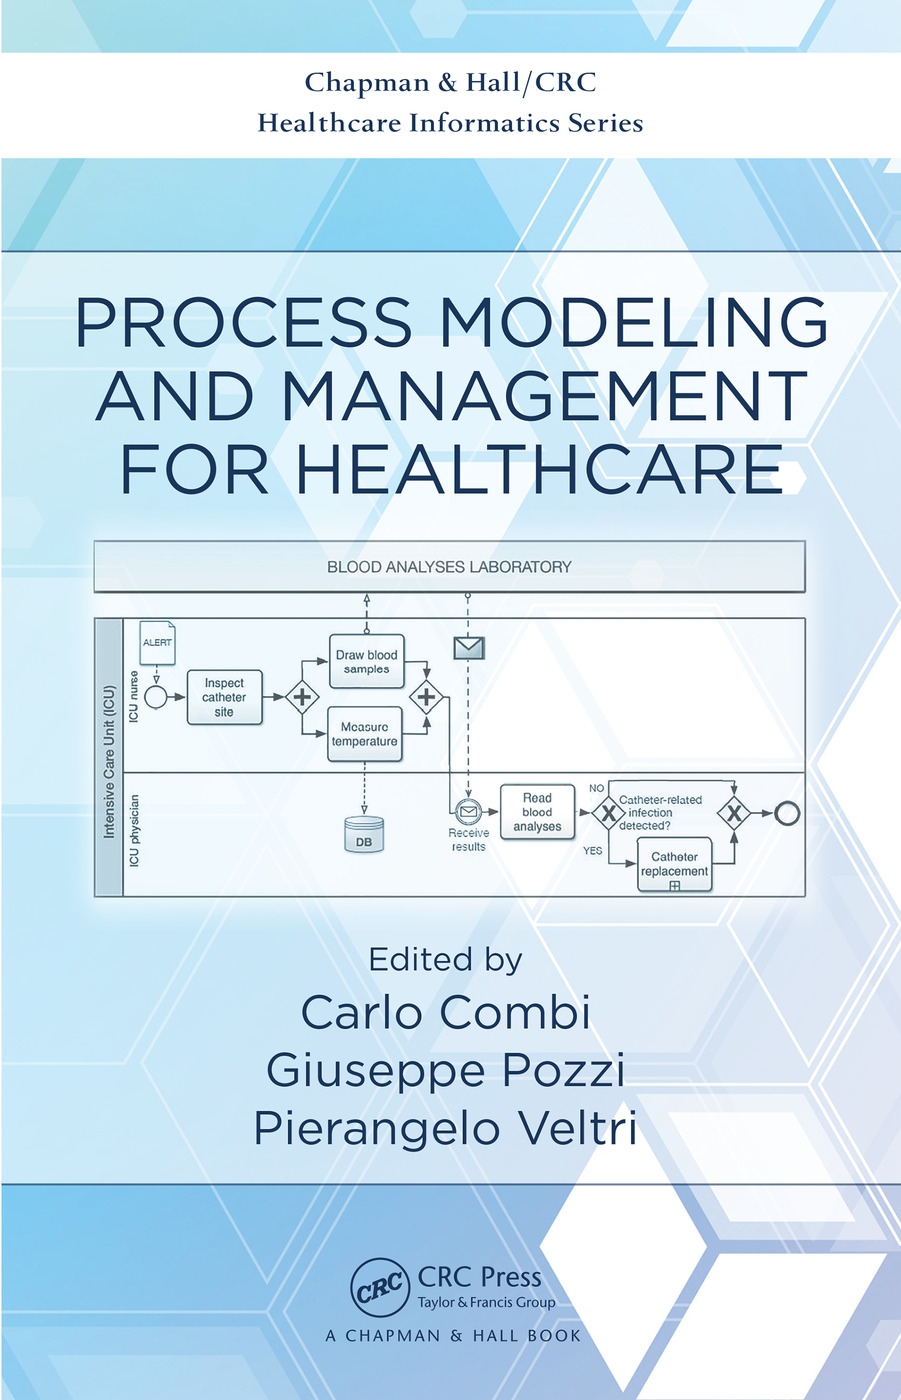 Process Modeling and Management for Healthcare